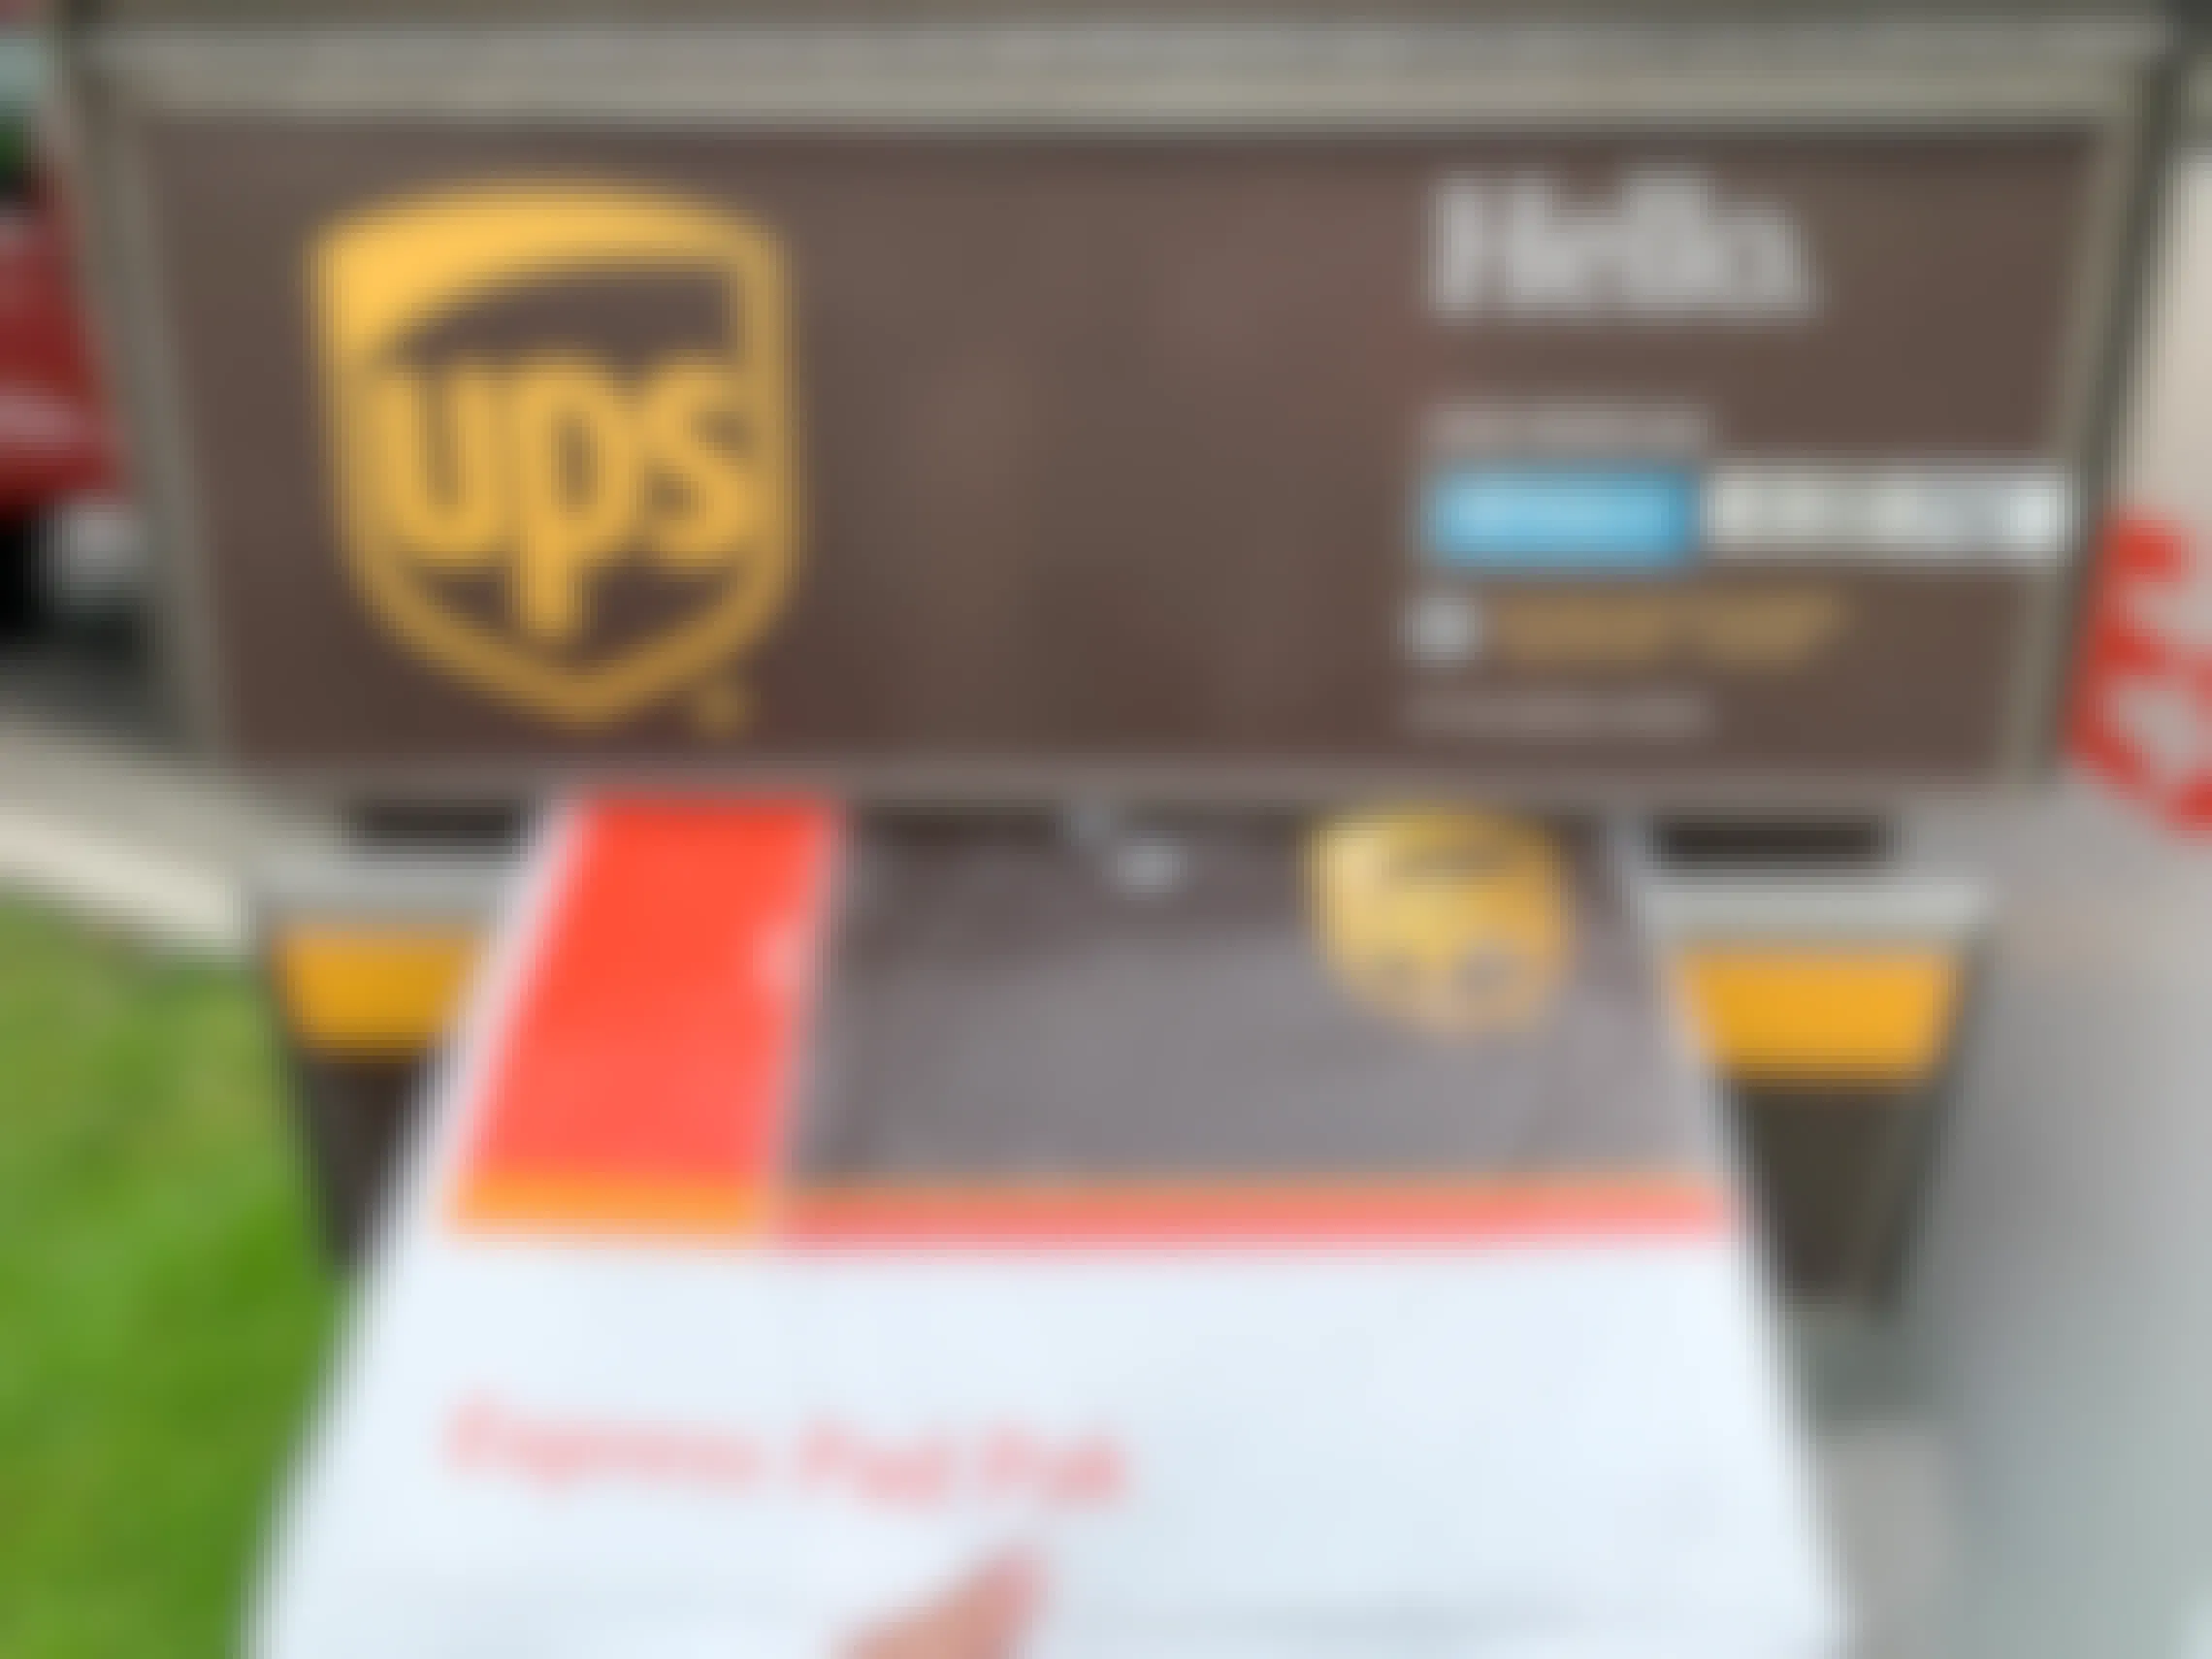 Ups package being dropped in a UPS mail box.